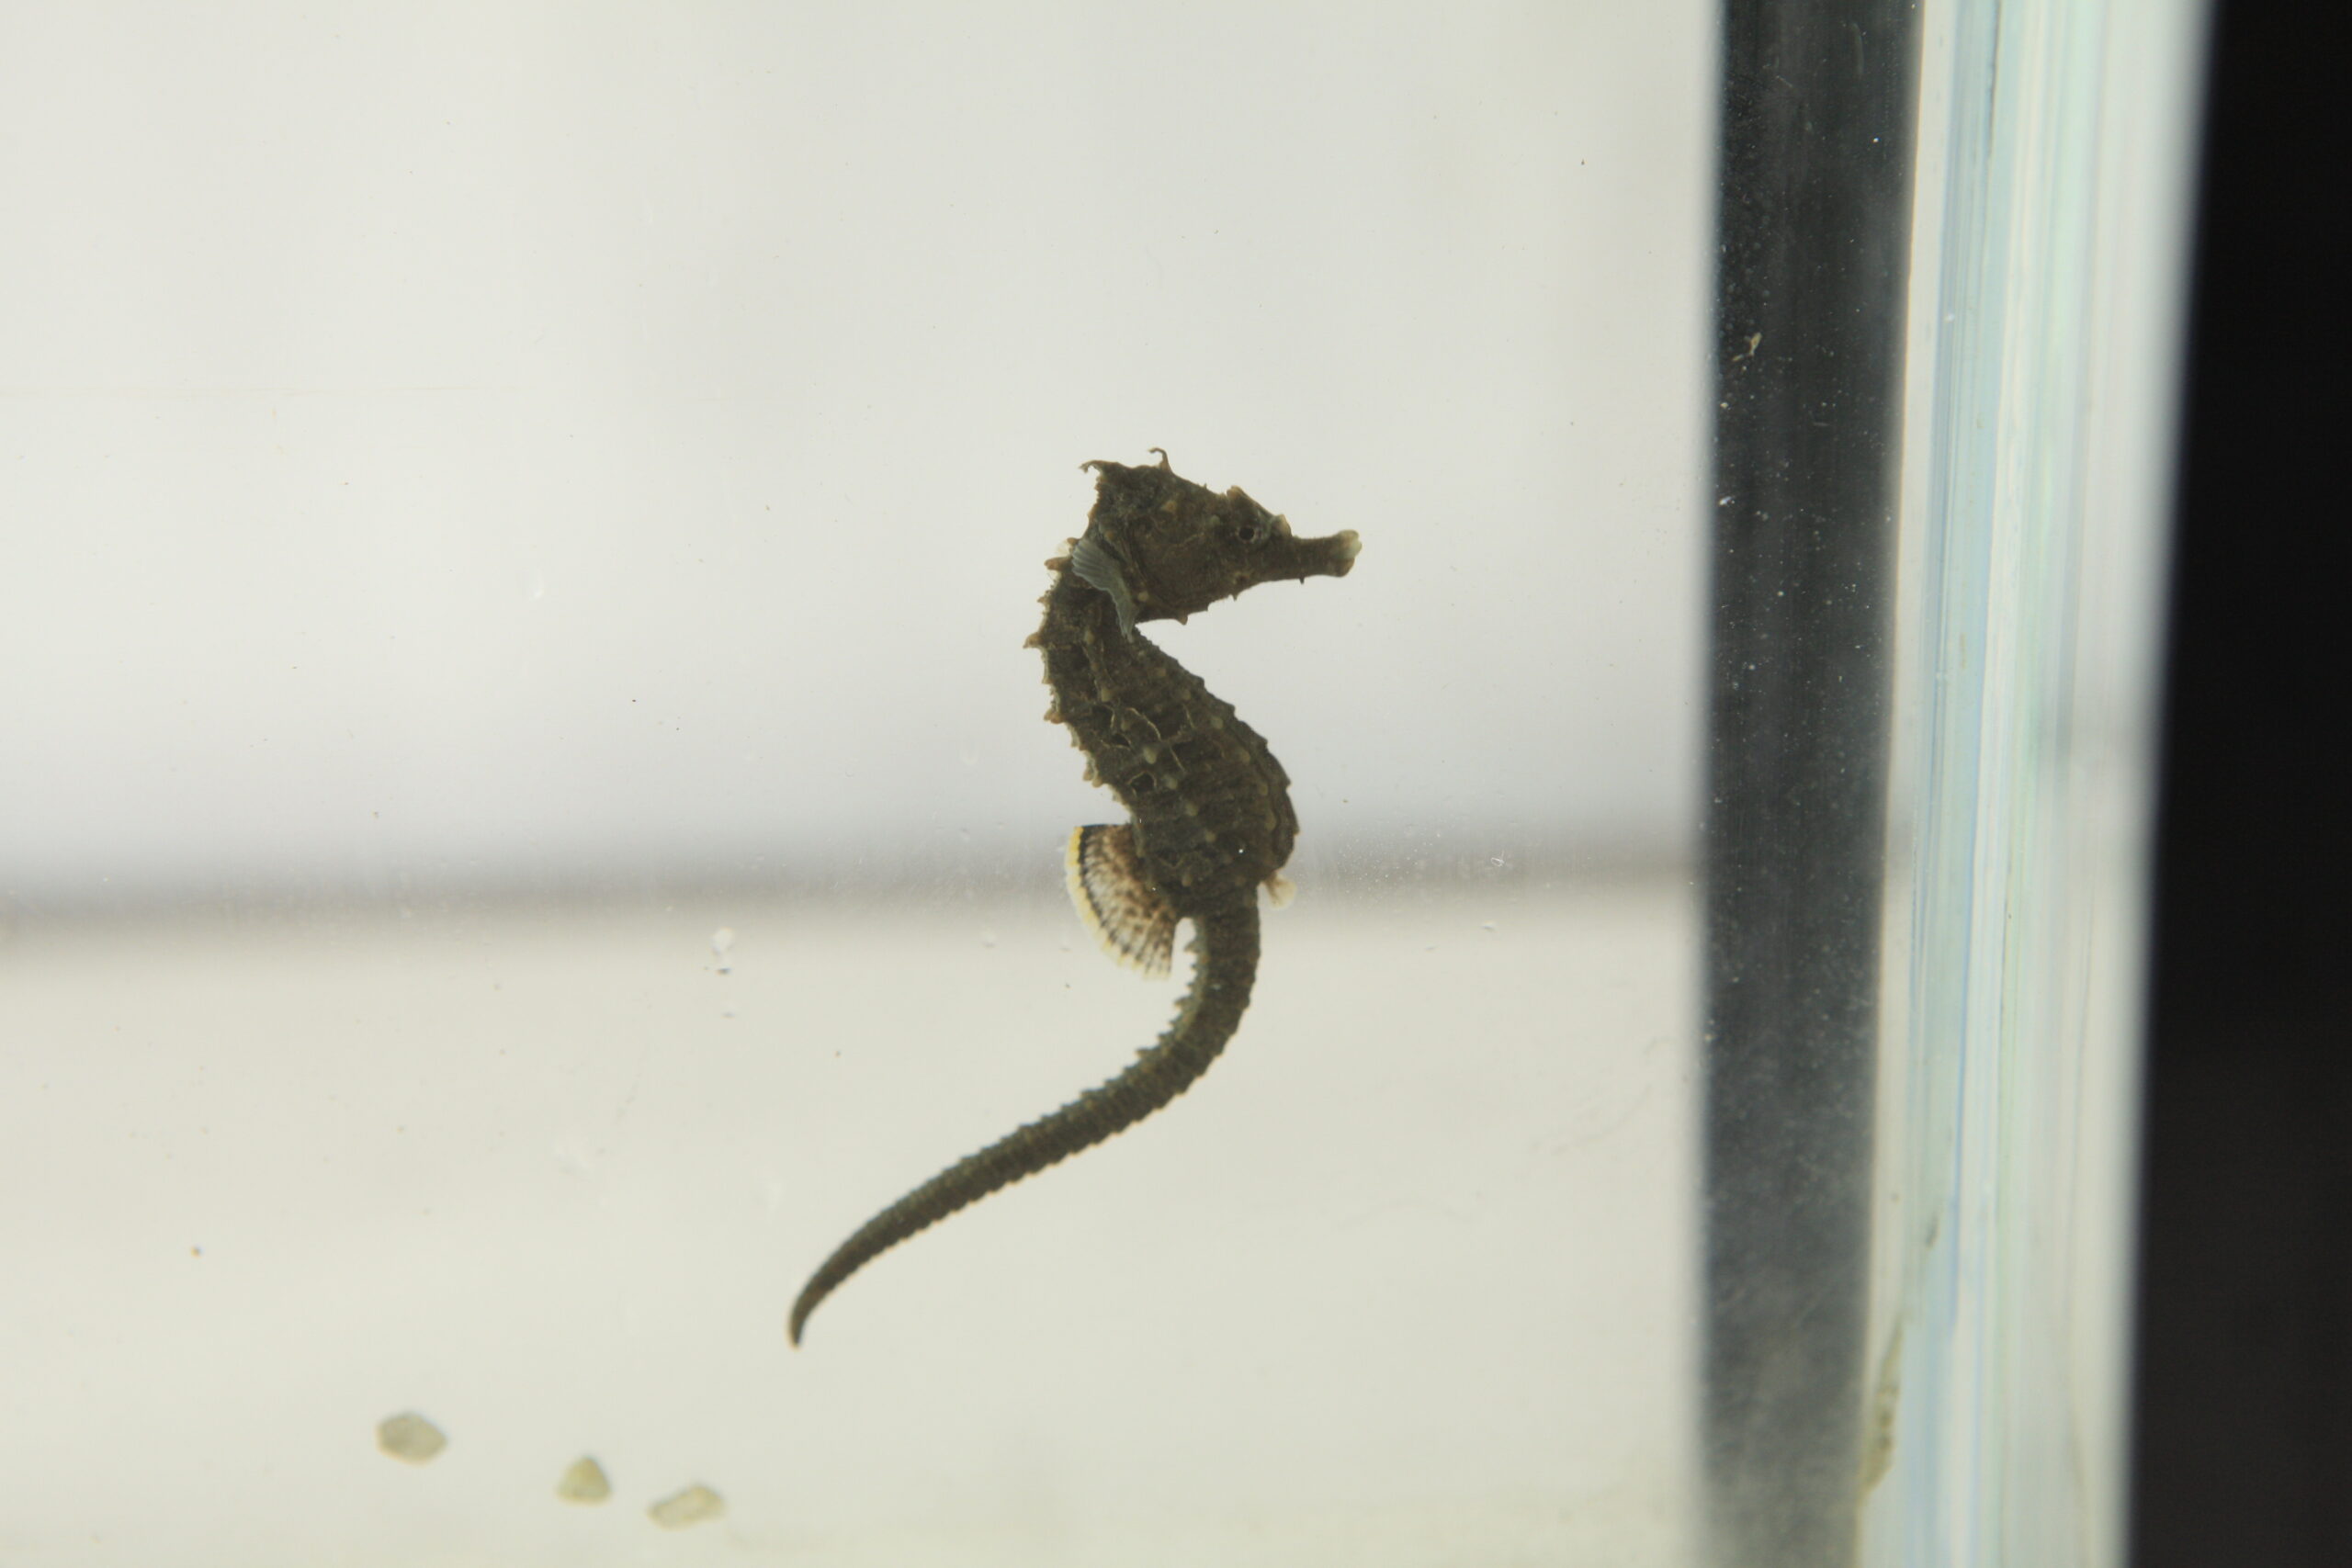 A lined seahorse floating by the tanks with its tail stretched out